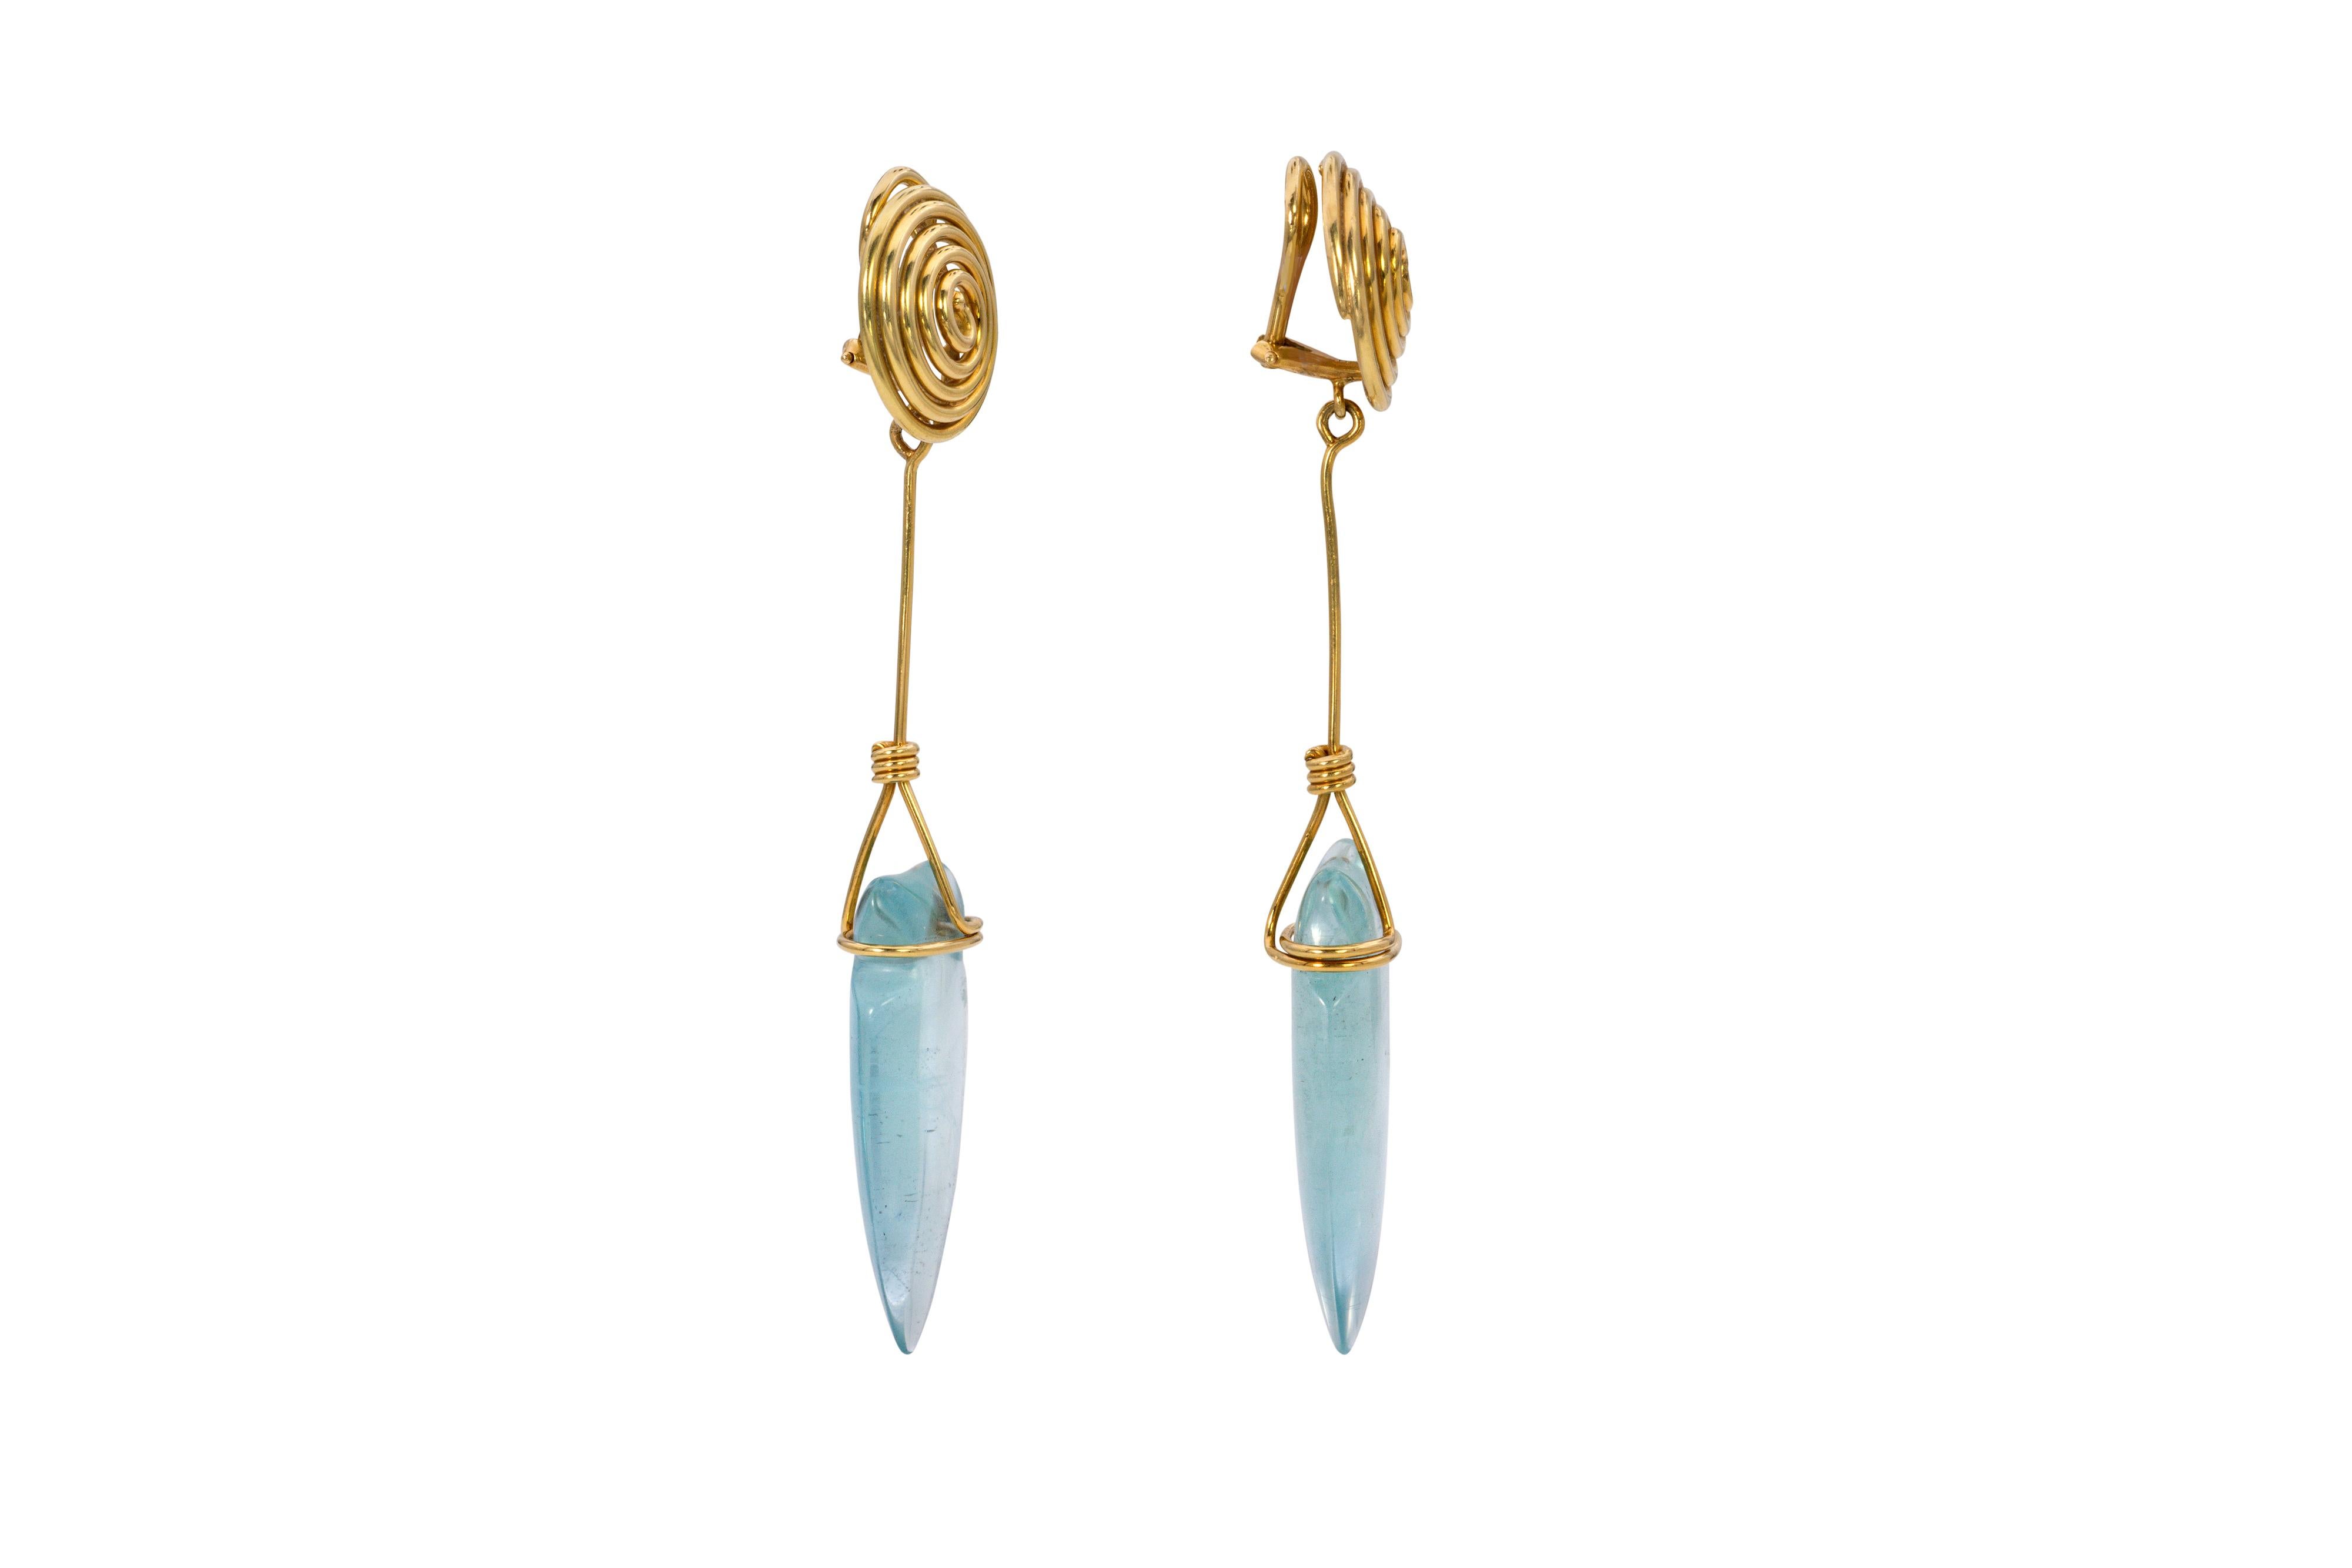 A pair of aquamarine and 18 karat gold dangle earrings, designed by fashion icon Tina Chow, 1980s. Earrings signed T. Chow, stamped 750, French import marks. Aquamarines signed © T. Chow. Clip-backs for non-pierced ears. 

These earrings represent